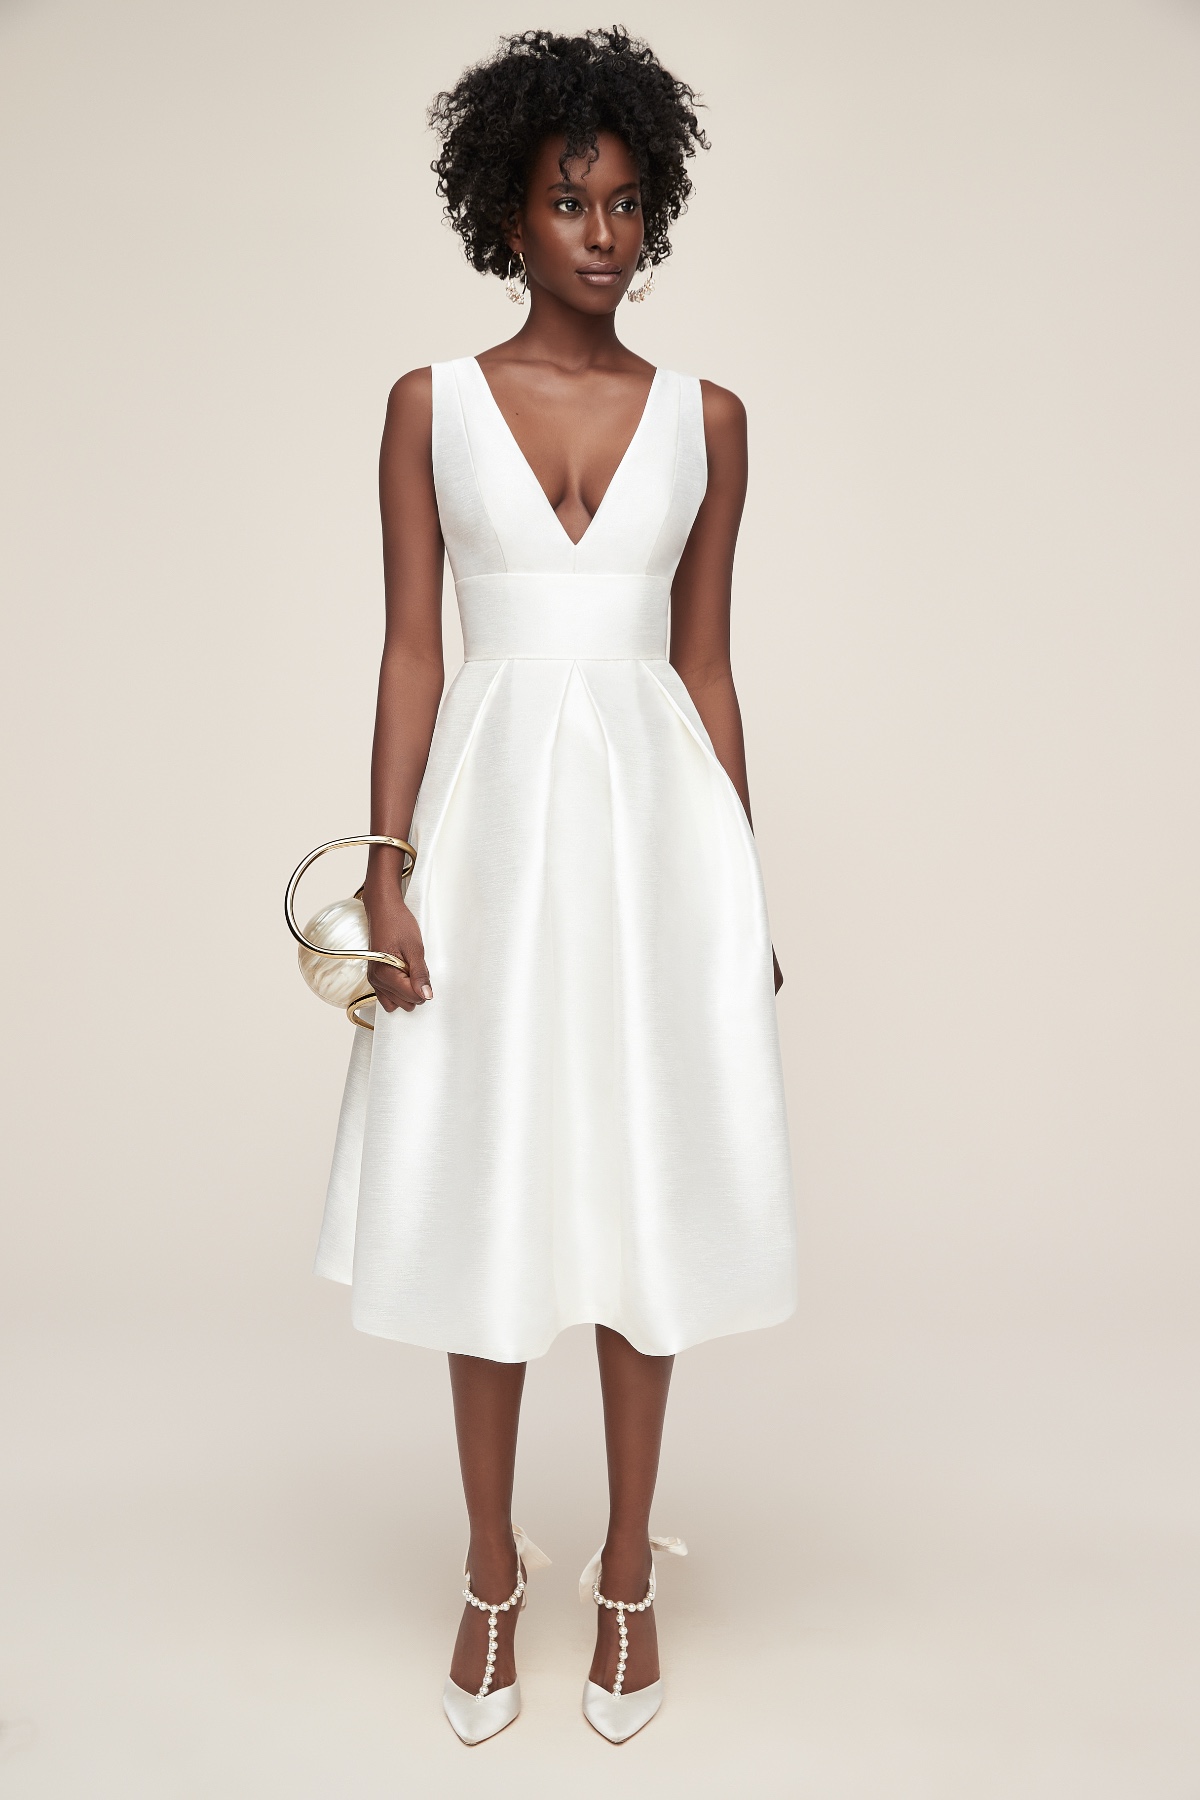 Anne Barge to launch Little White Dress collection